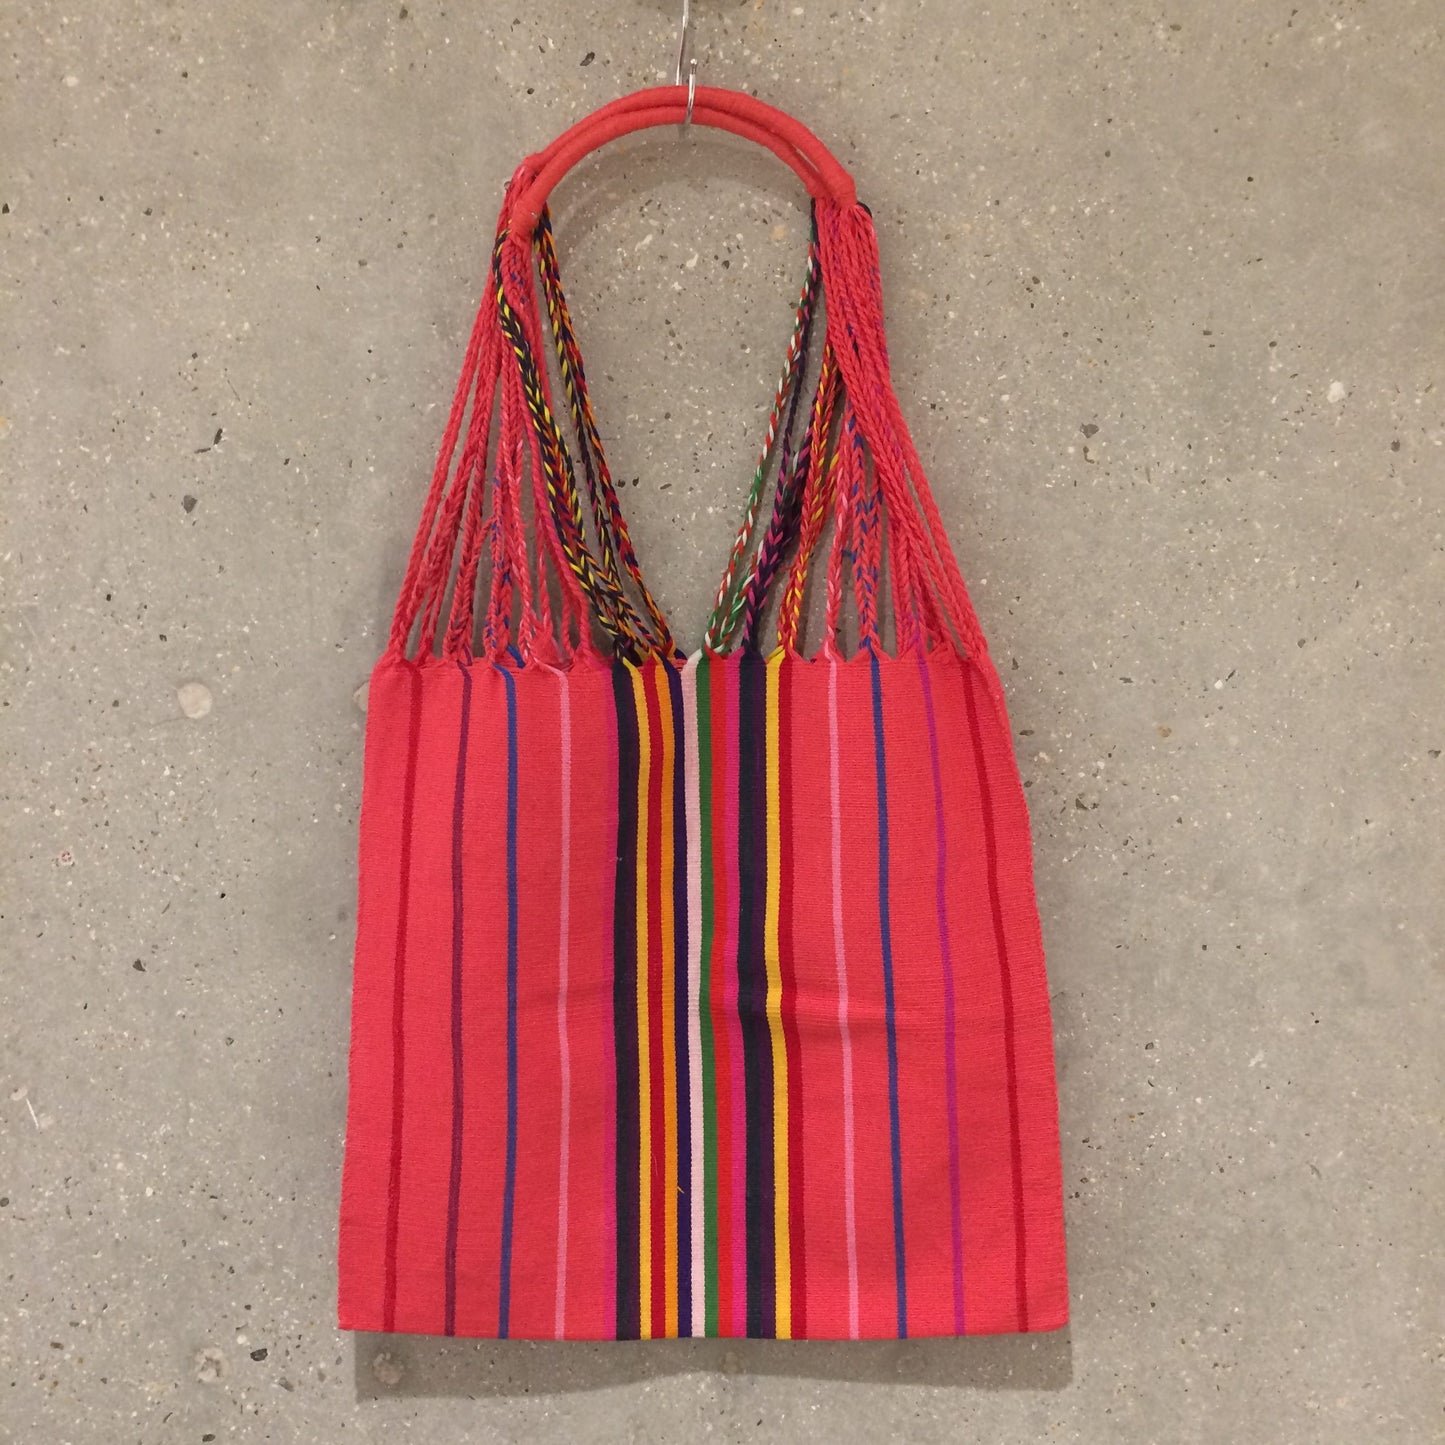 Mexican Handwoven, colourful bag from Chiapas - Pink